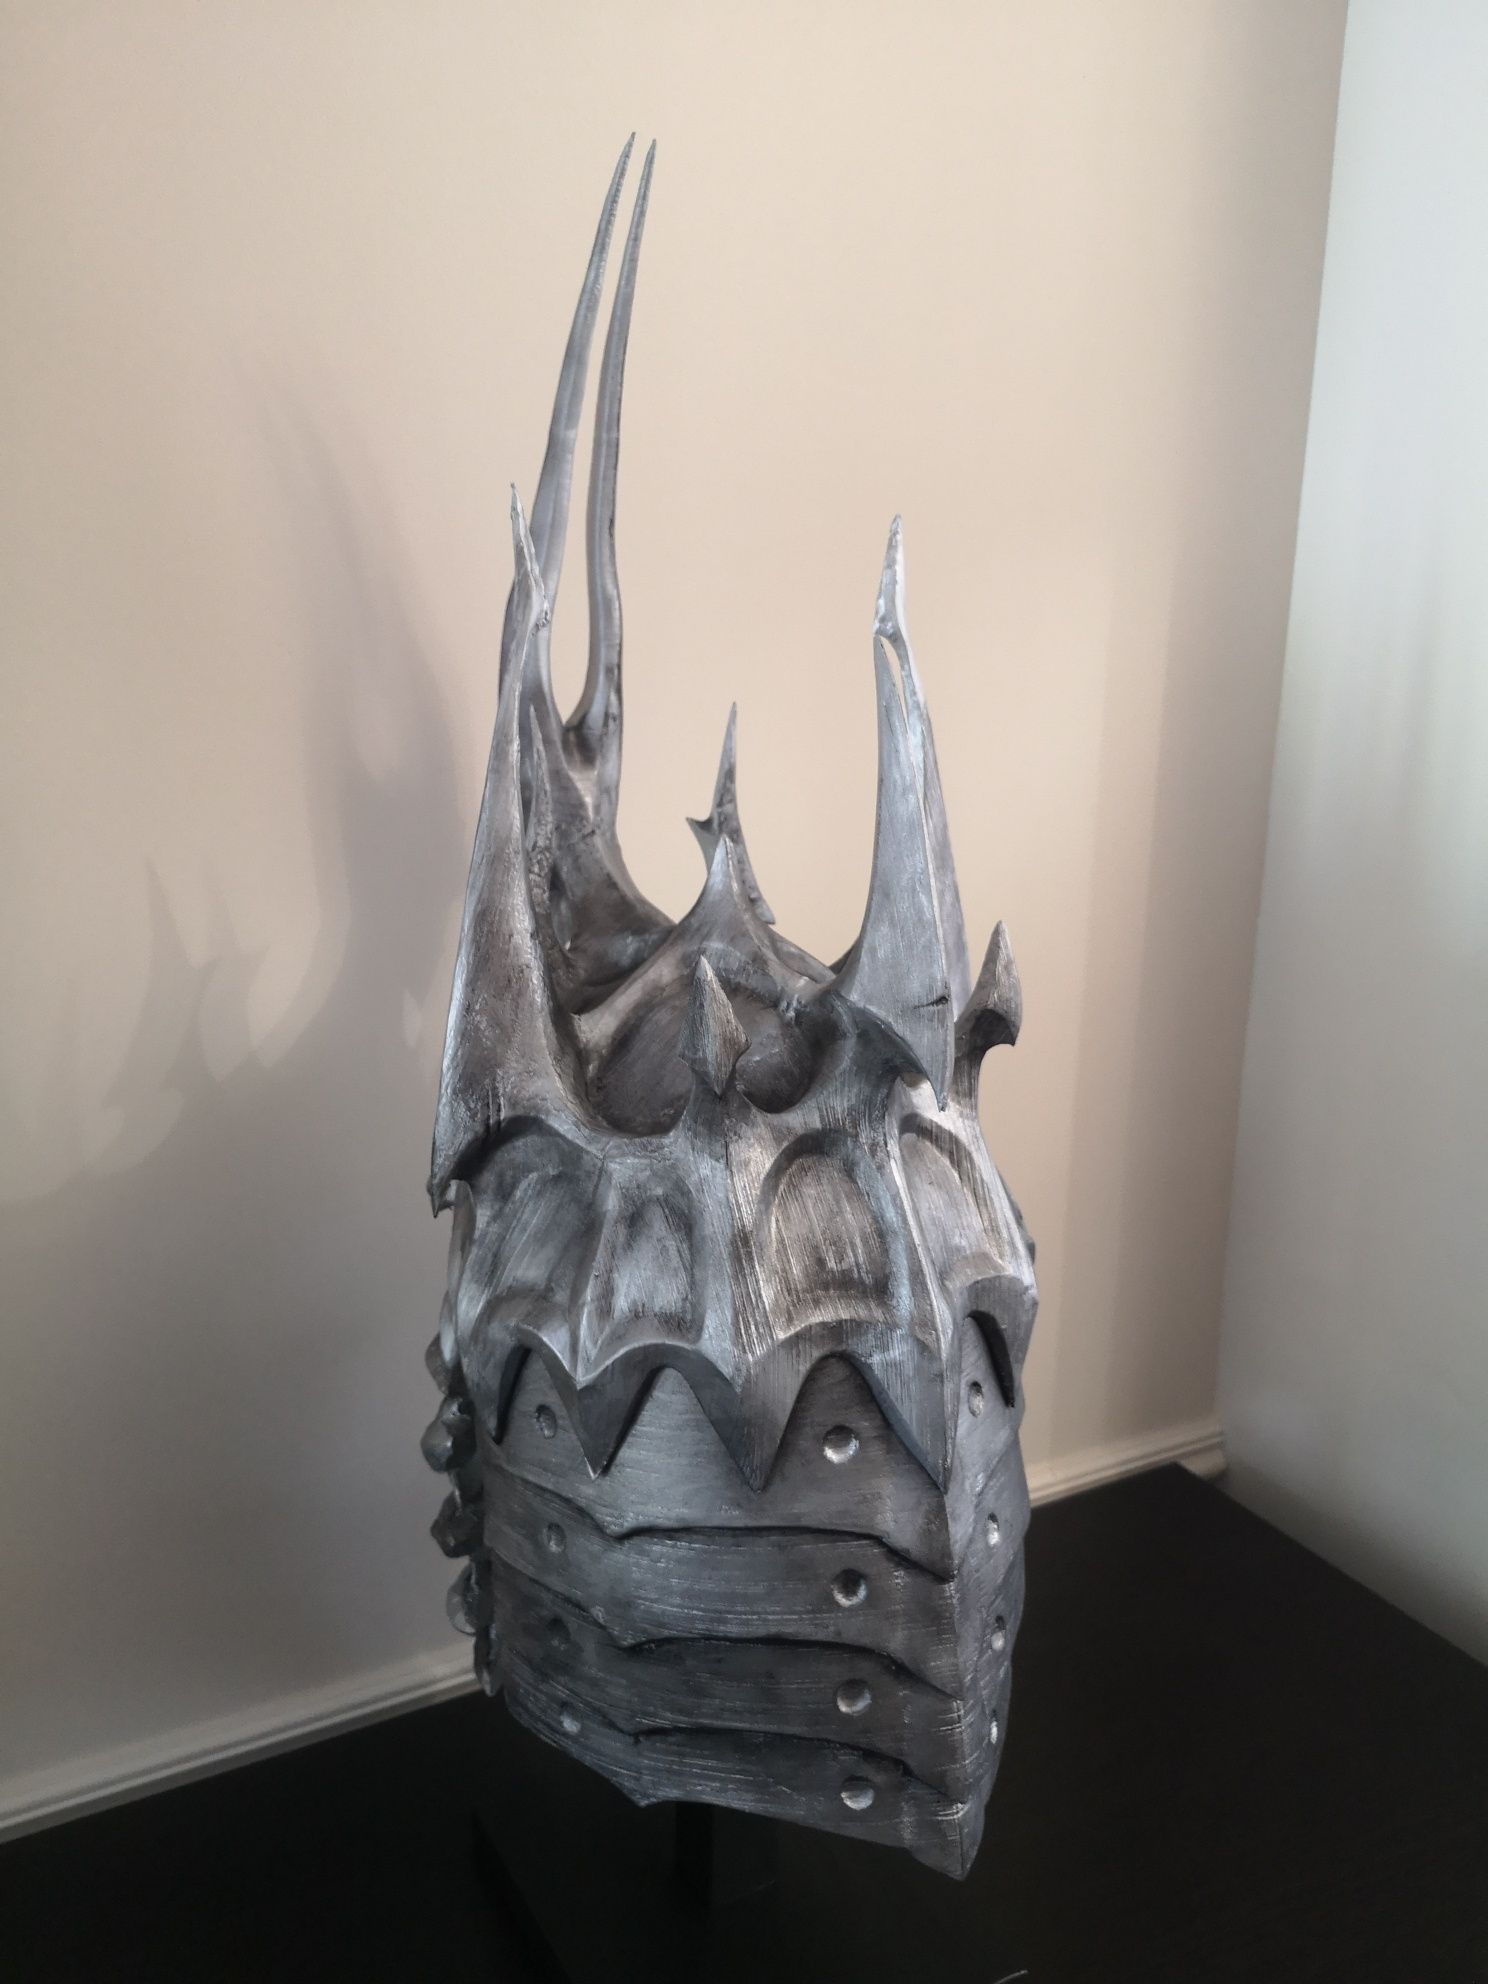 Capacete do Lich King - WoW - World of WarCraft